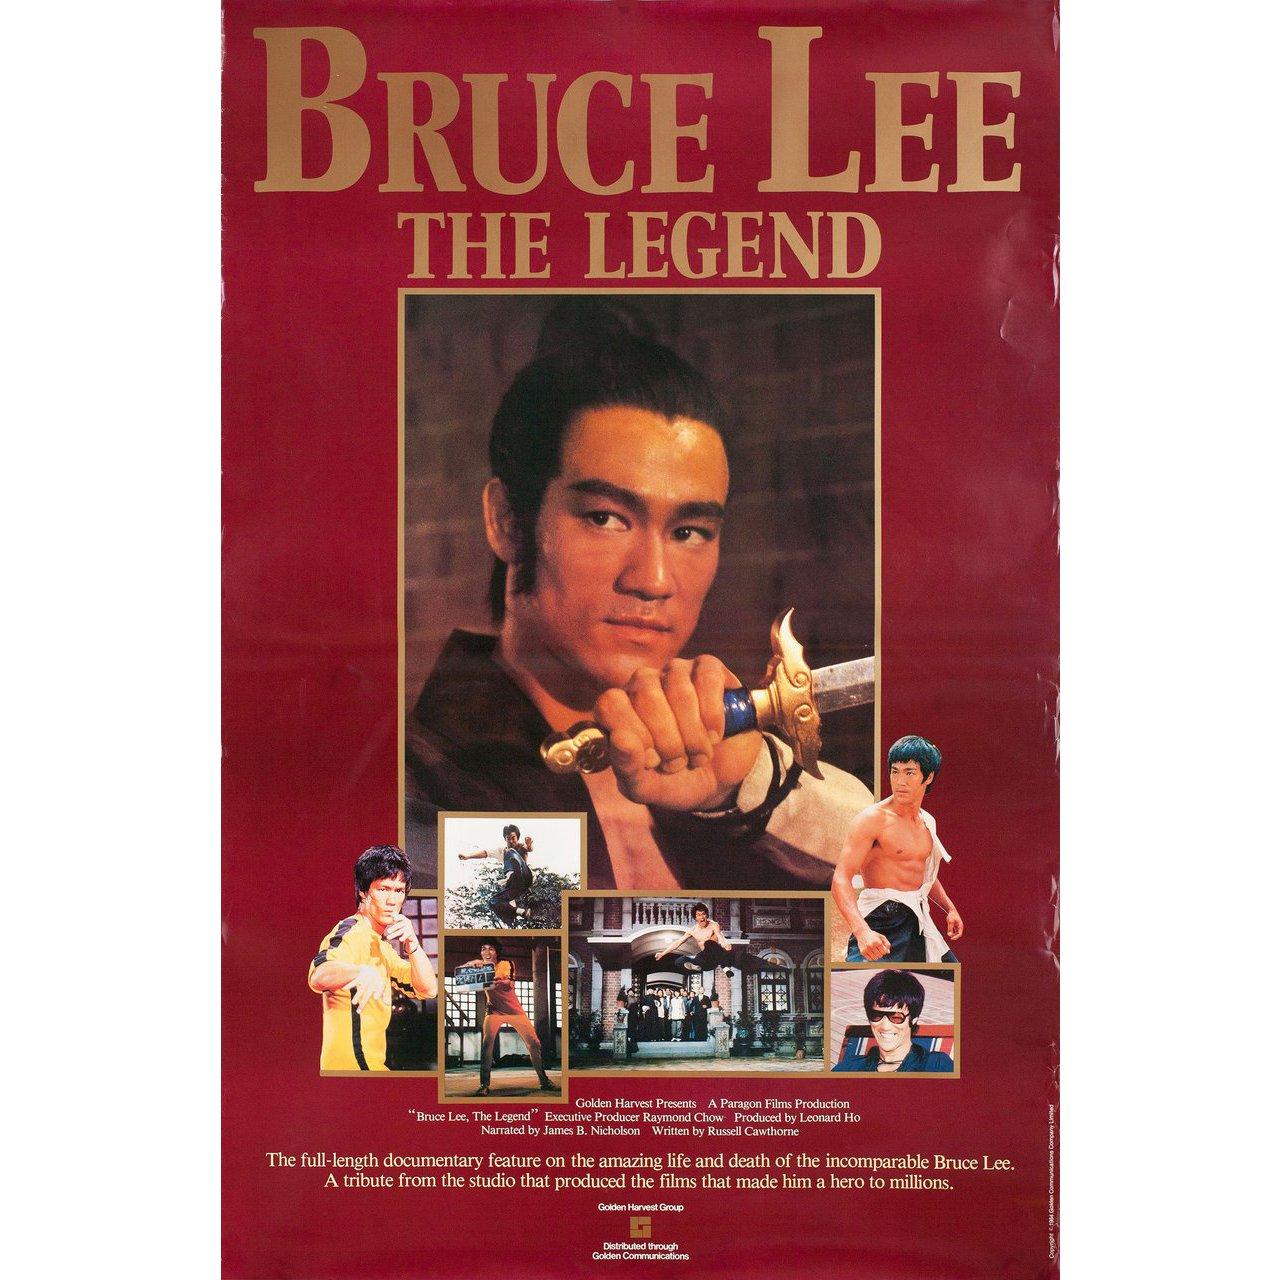 Original 1984 British one sheet poster for the documentary film Bruce Lee, the Legend (Bruce Lee: The Legend) directed by Leonard Ho with Bruce Lee / James B. Nicholson / Hoi-Chuen Lee / Raymond Chow. Very good-fine condition, rolled. Please note: